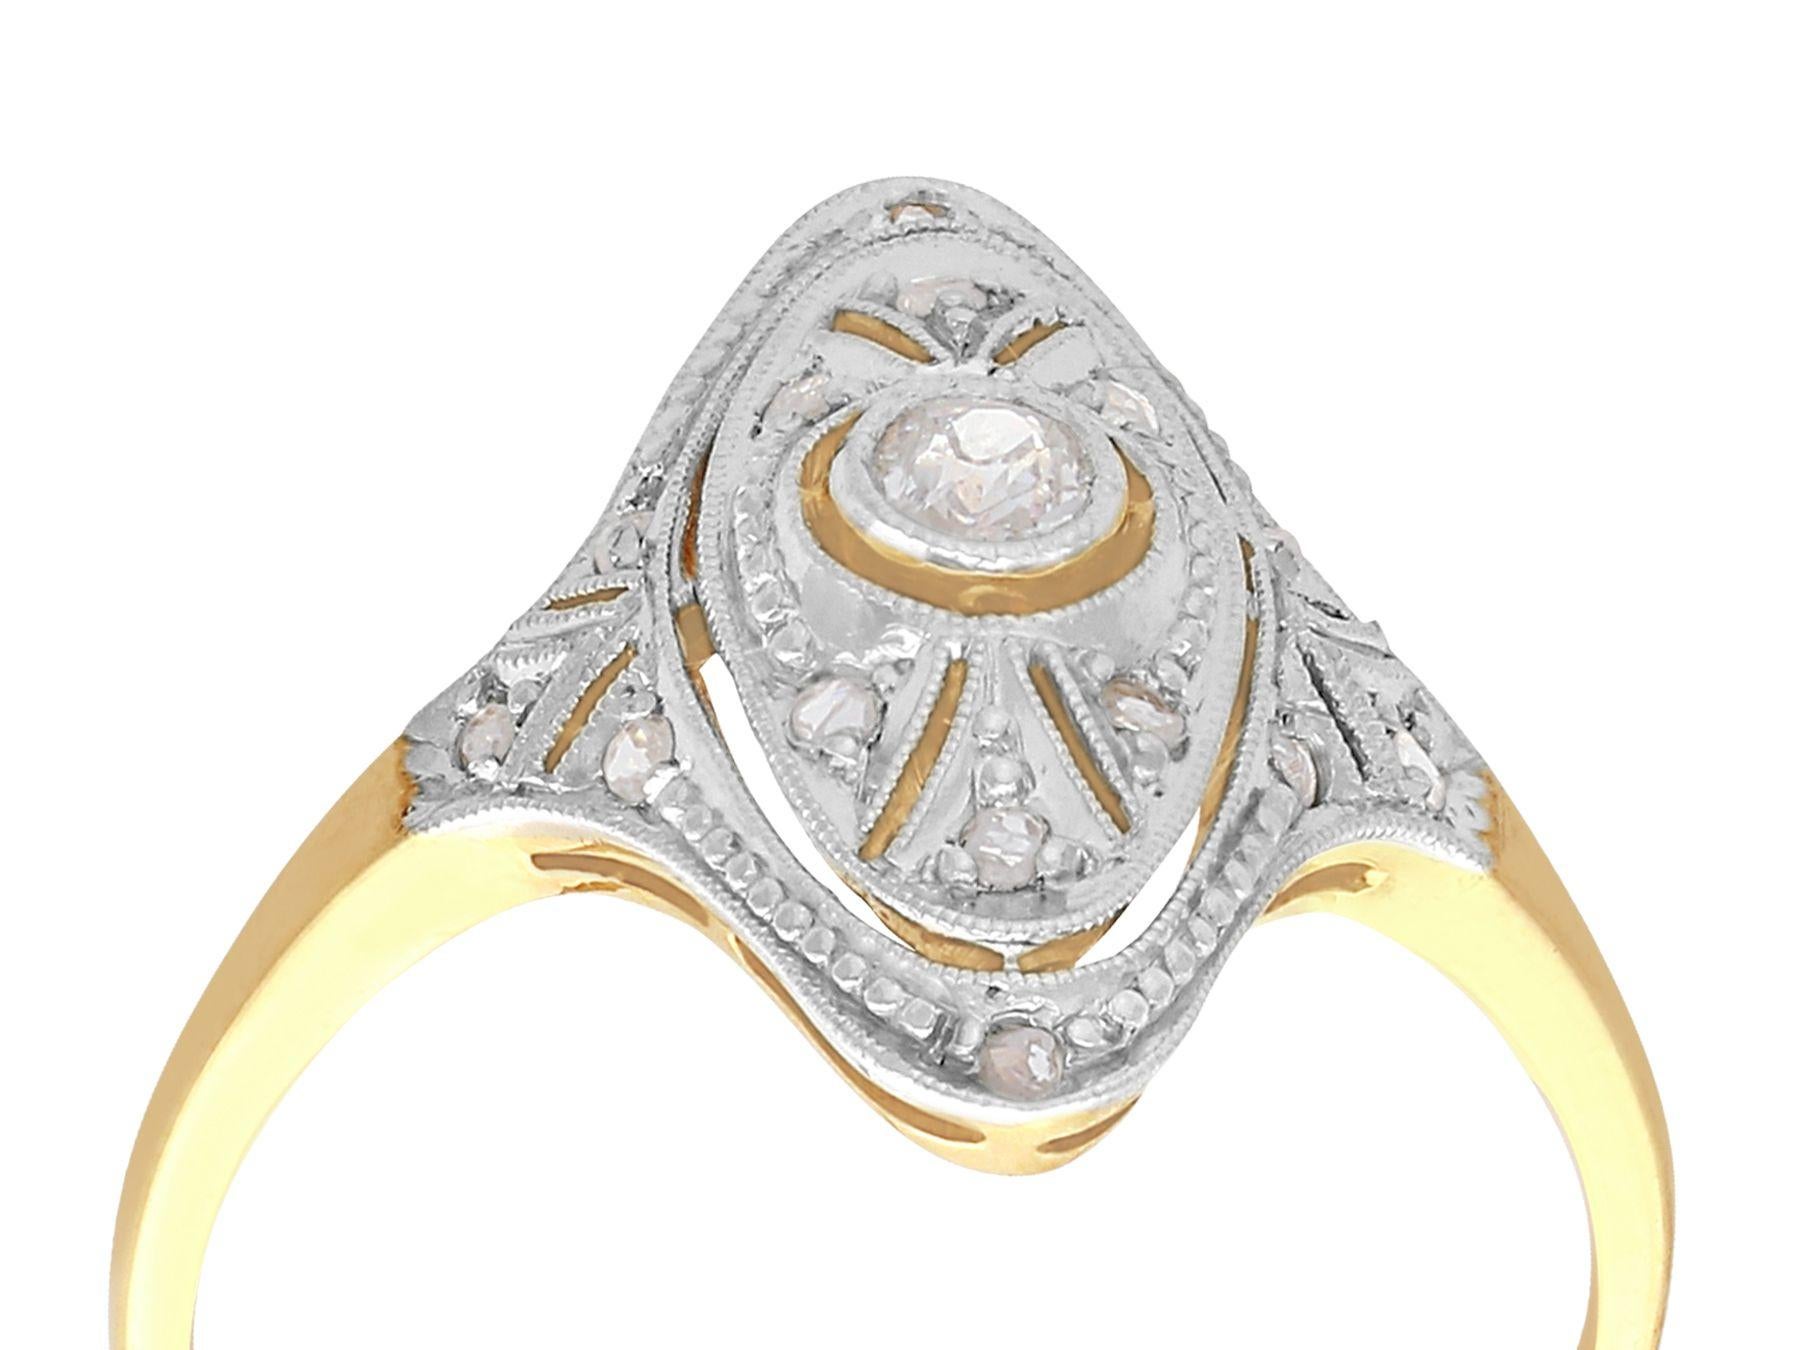 An impressive 0.12 carat diamond and 14 karat yellow gold, 14 karat white gold set marquise ring; part of our diverse antique jewelry and estate jewelry collections.

This fine and impressive antique 1920s diamond ring has been crafted in 14k yellow